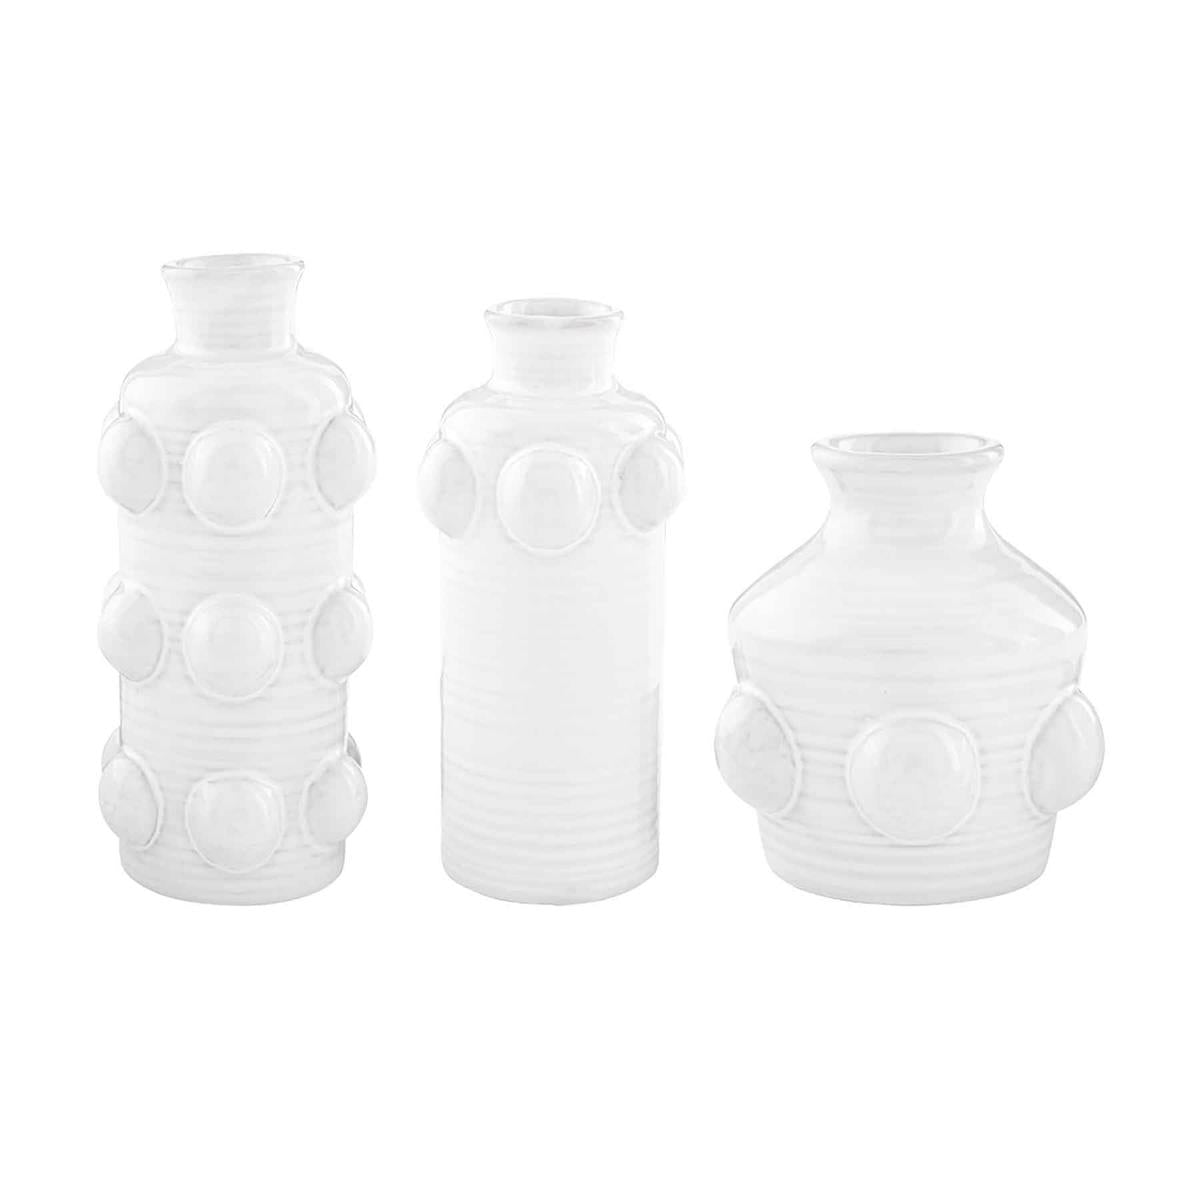 all three sizes of raised dot bud vases on a white background